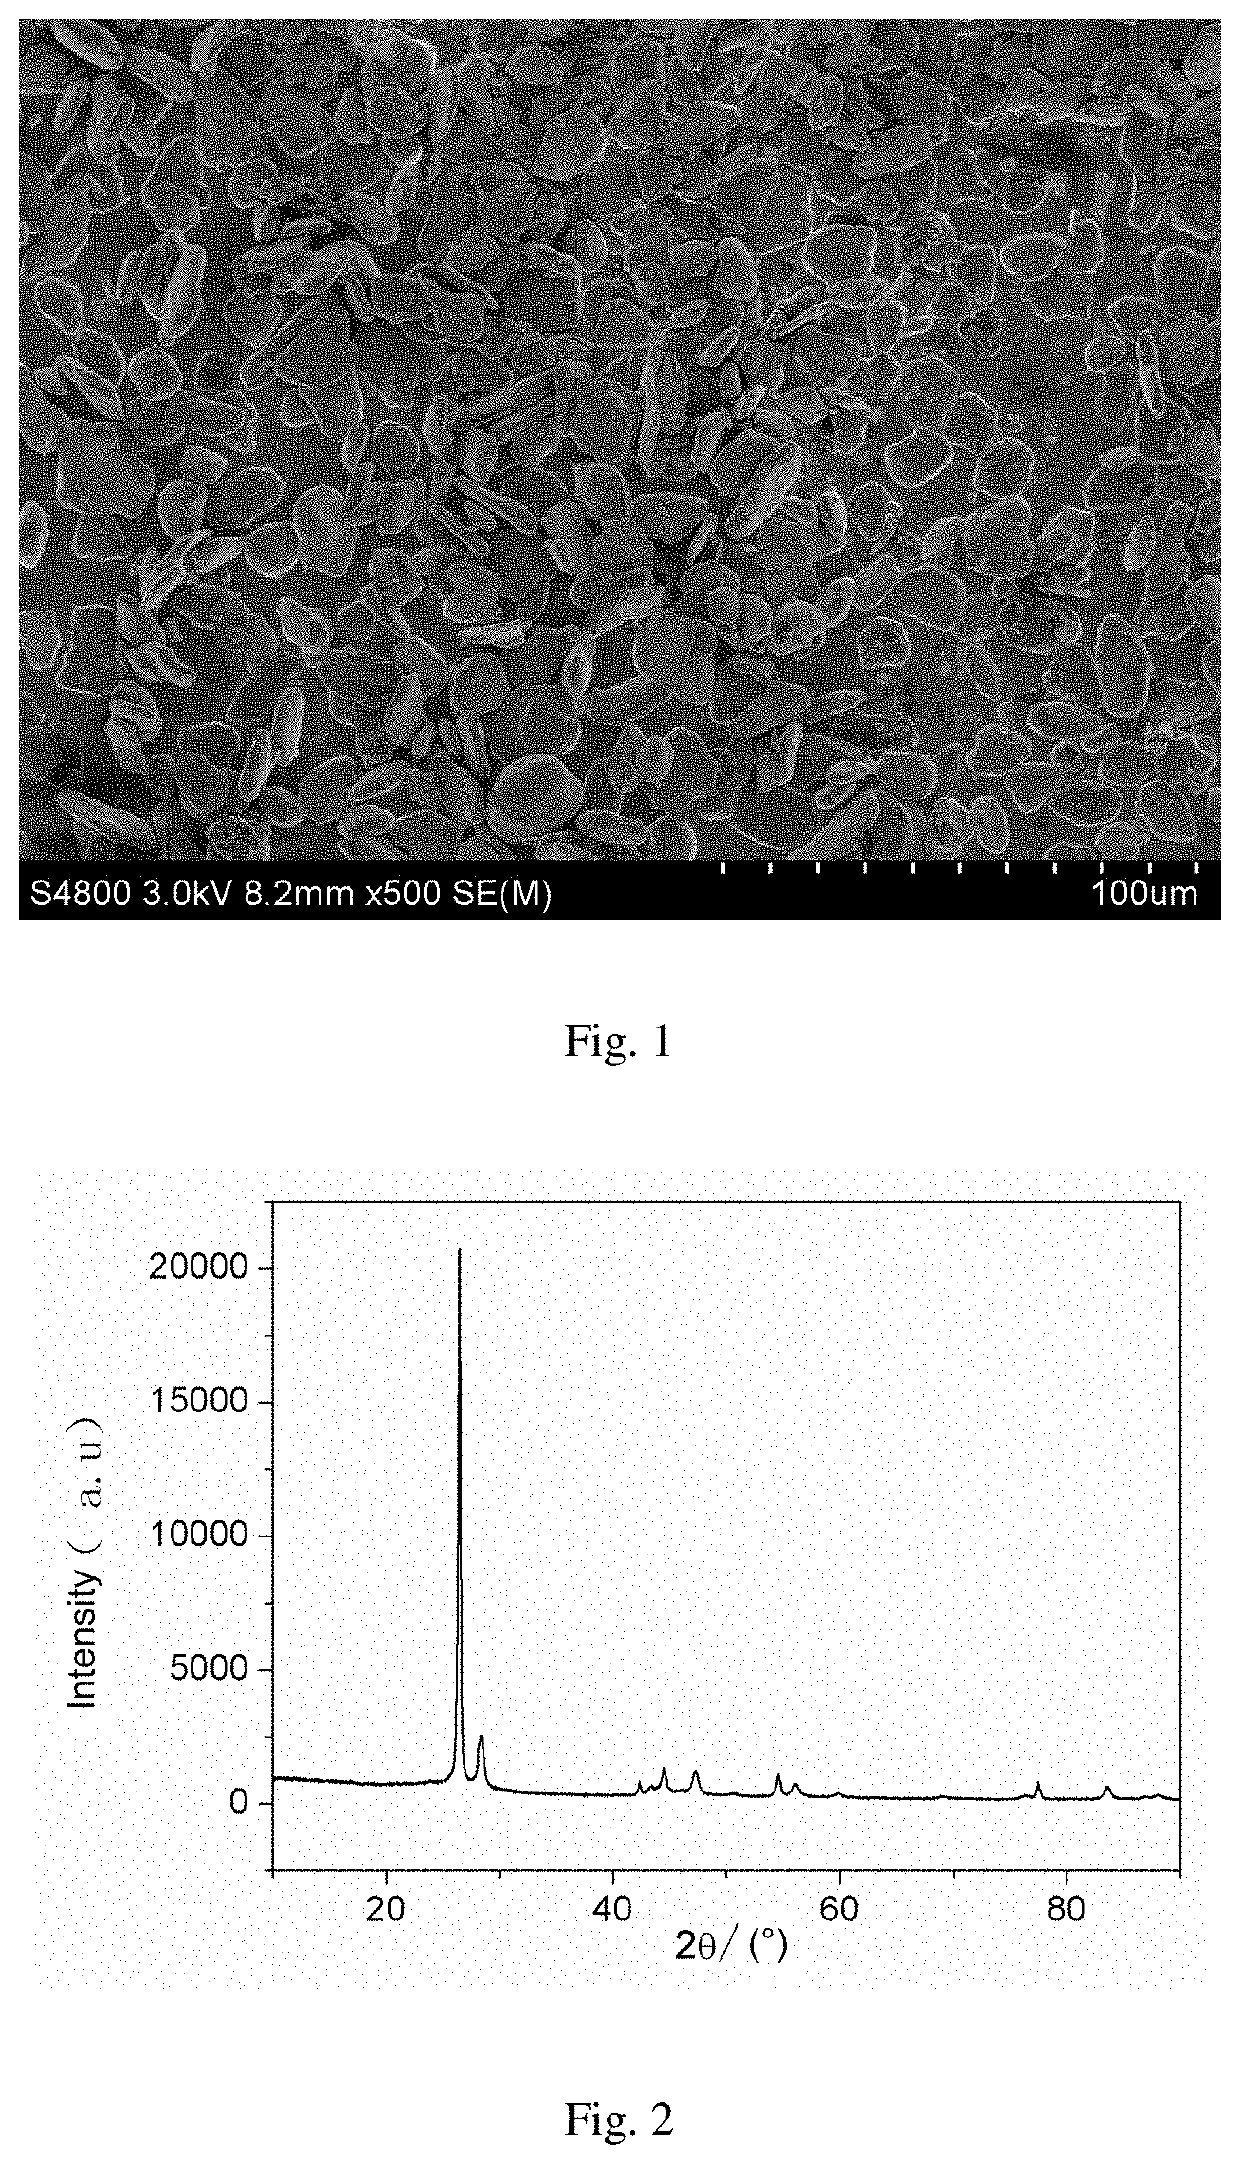 Multiple-element composite material for anodes, preparation method therefor, and lithium-ion battery having same